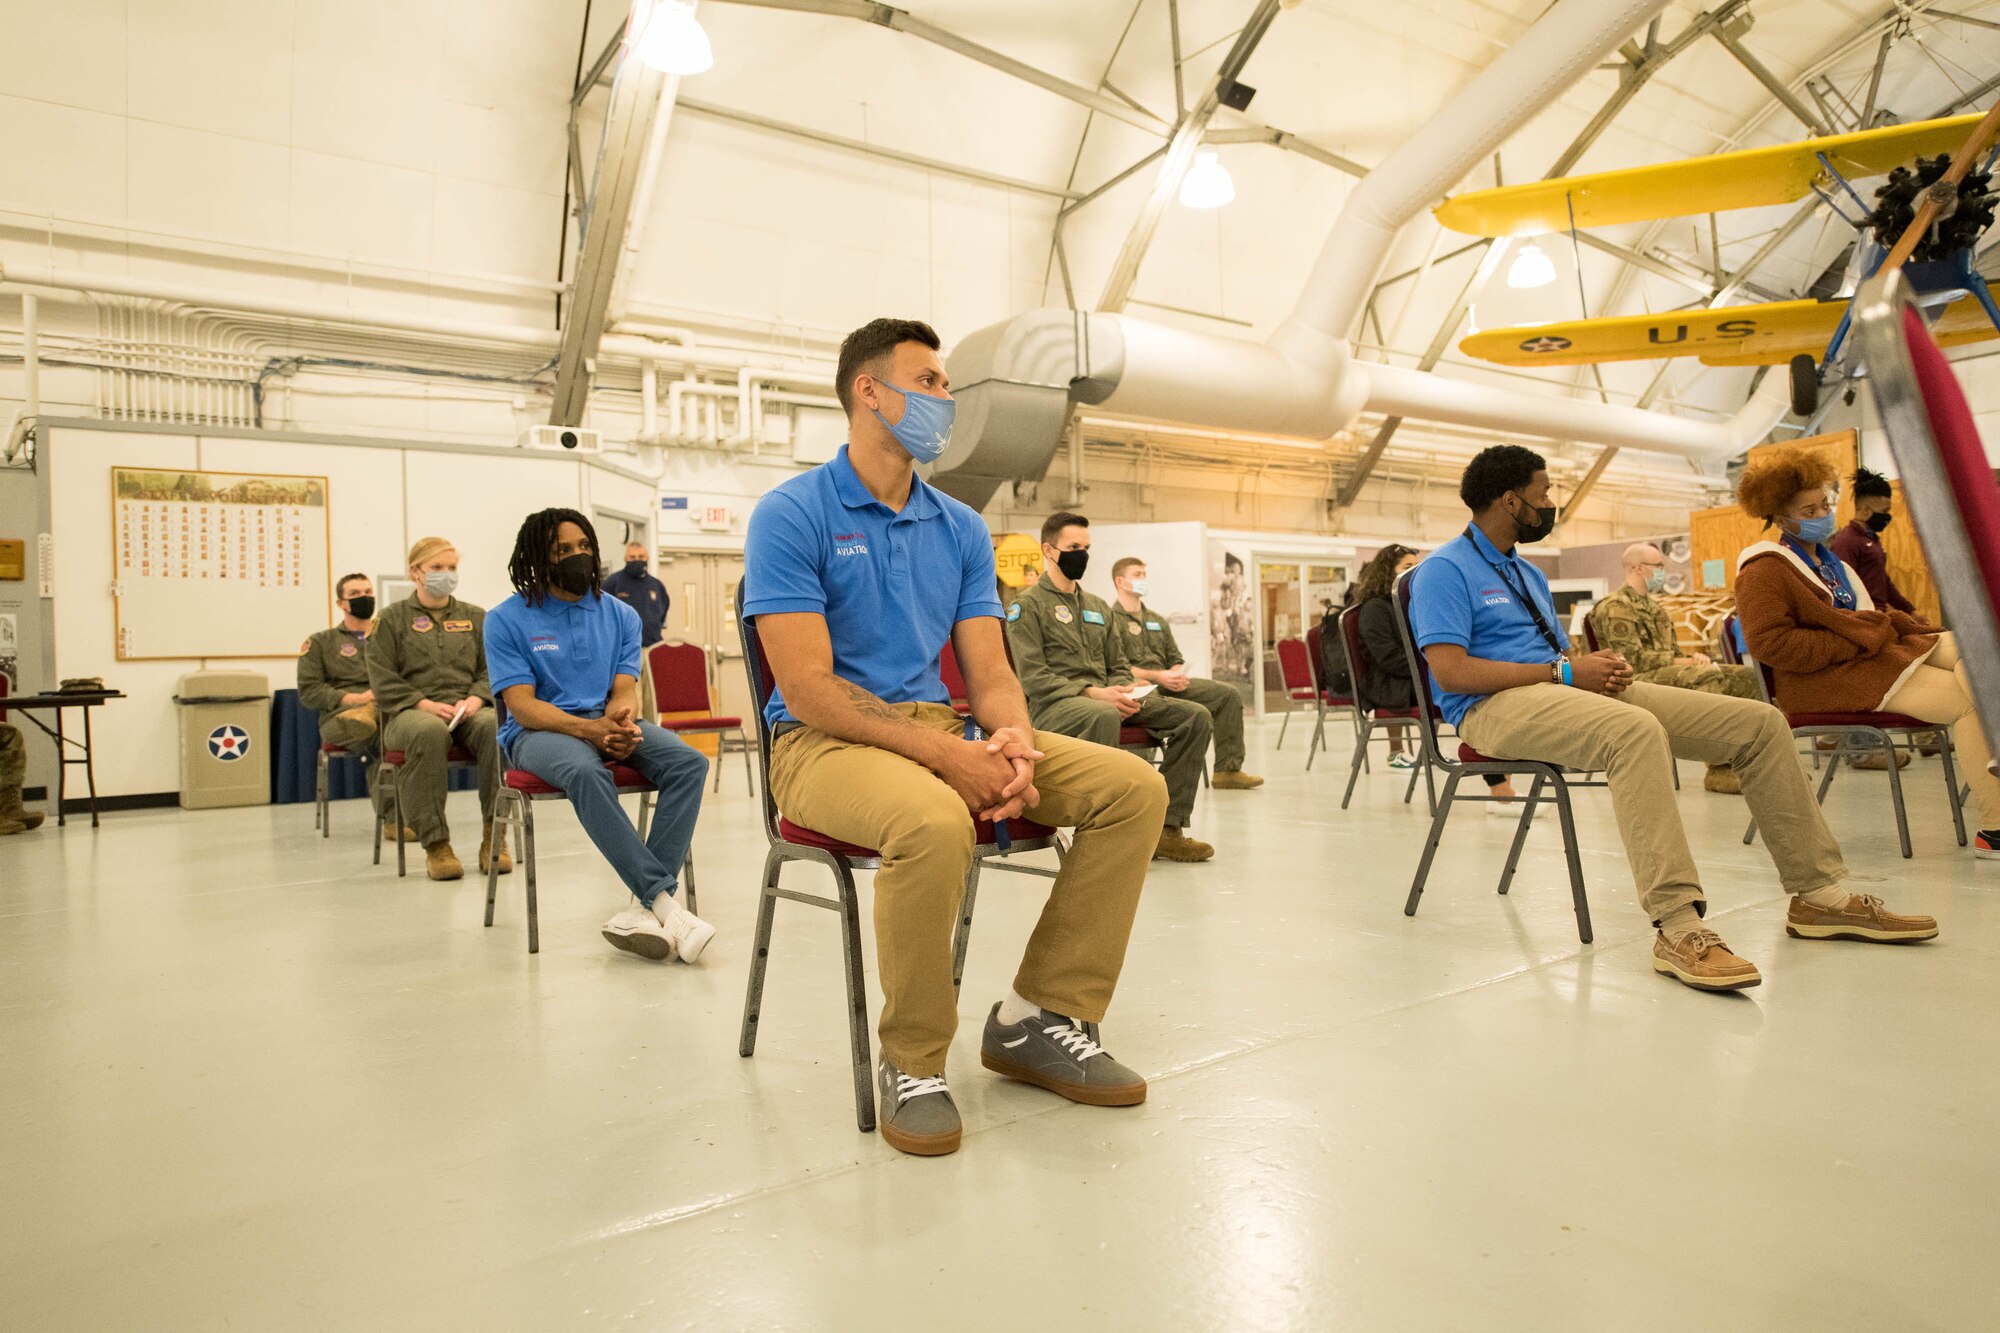 Delaware State University students and 436th Airlift Wing pilots listen to opening remarks by Col. Matthew Jones, 436th AW commander, during an aviation mentorship kickoff event at the Air Mobility Command Museum on Dover Air Force Base